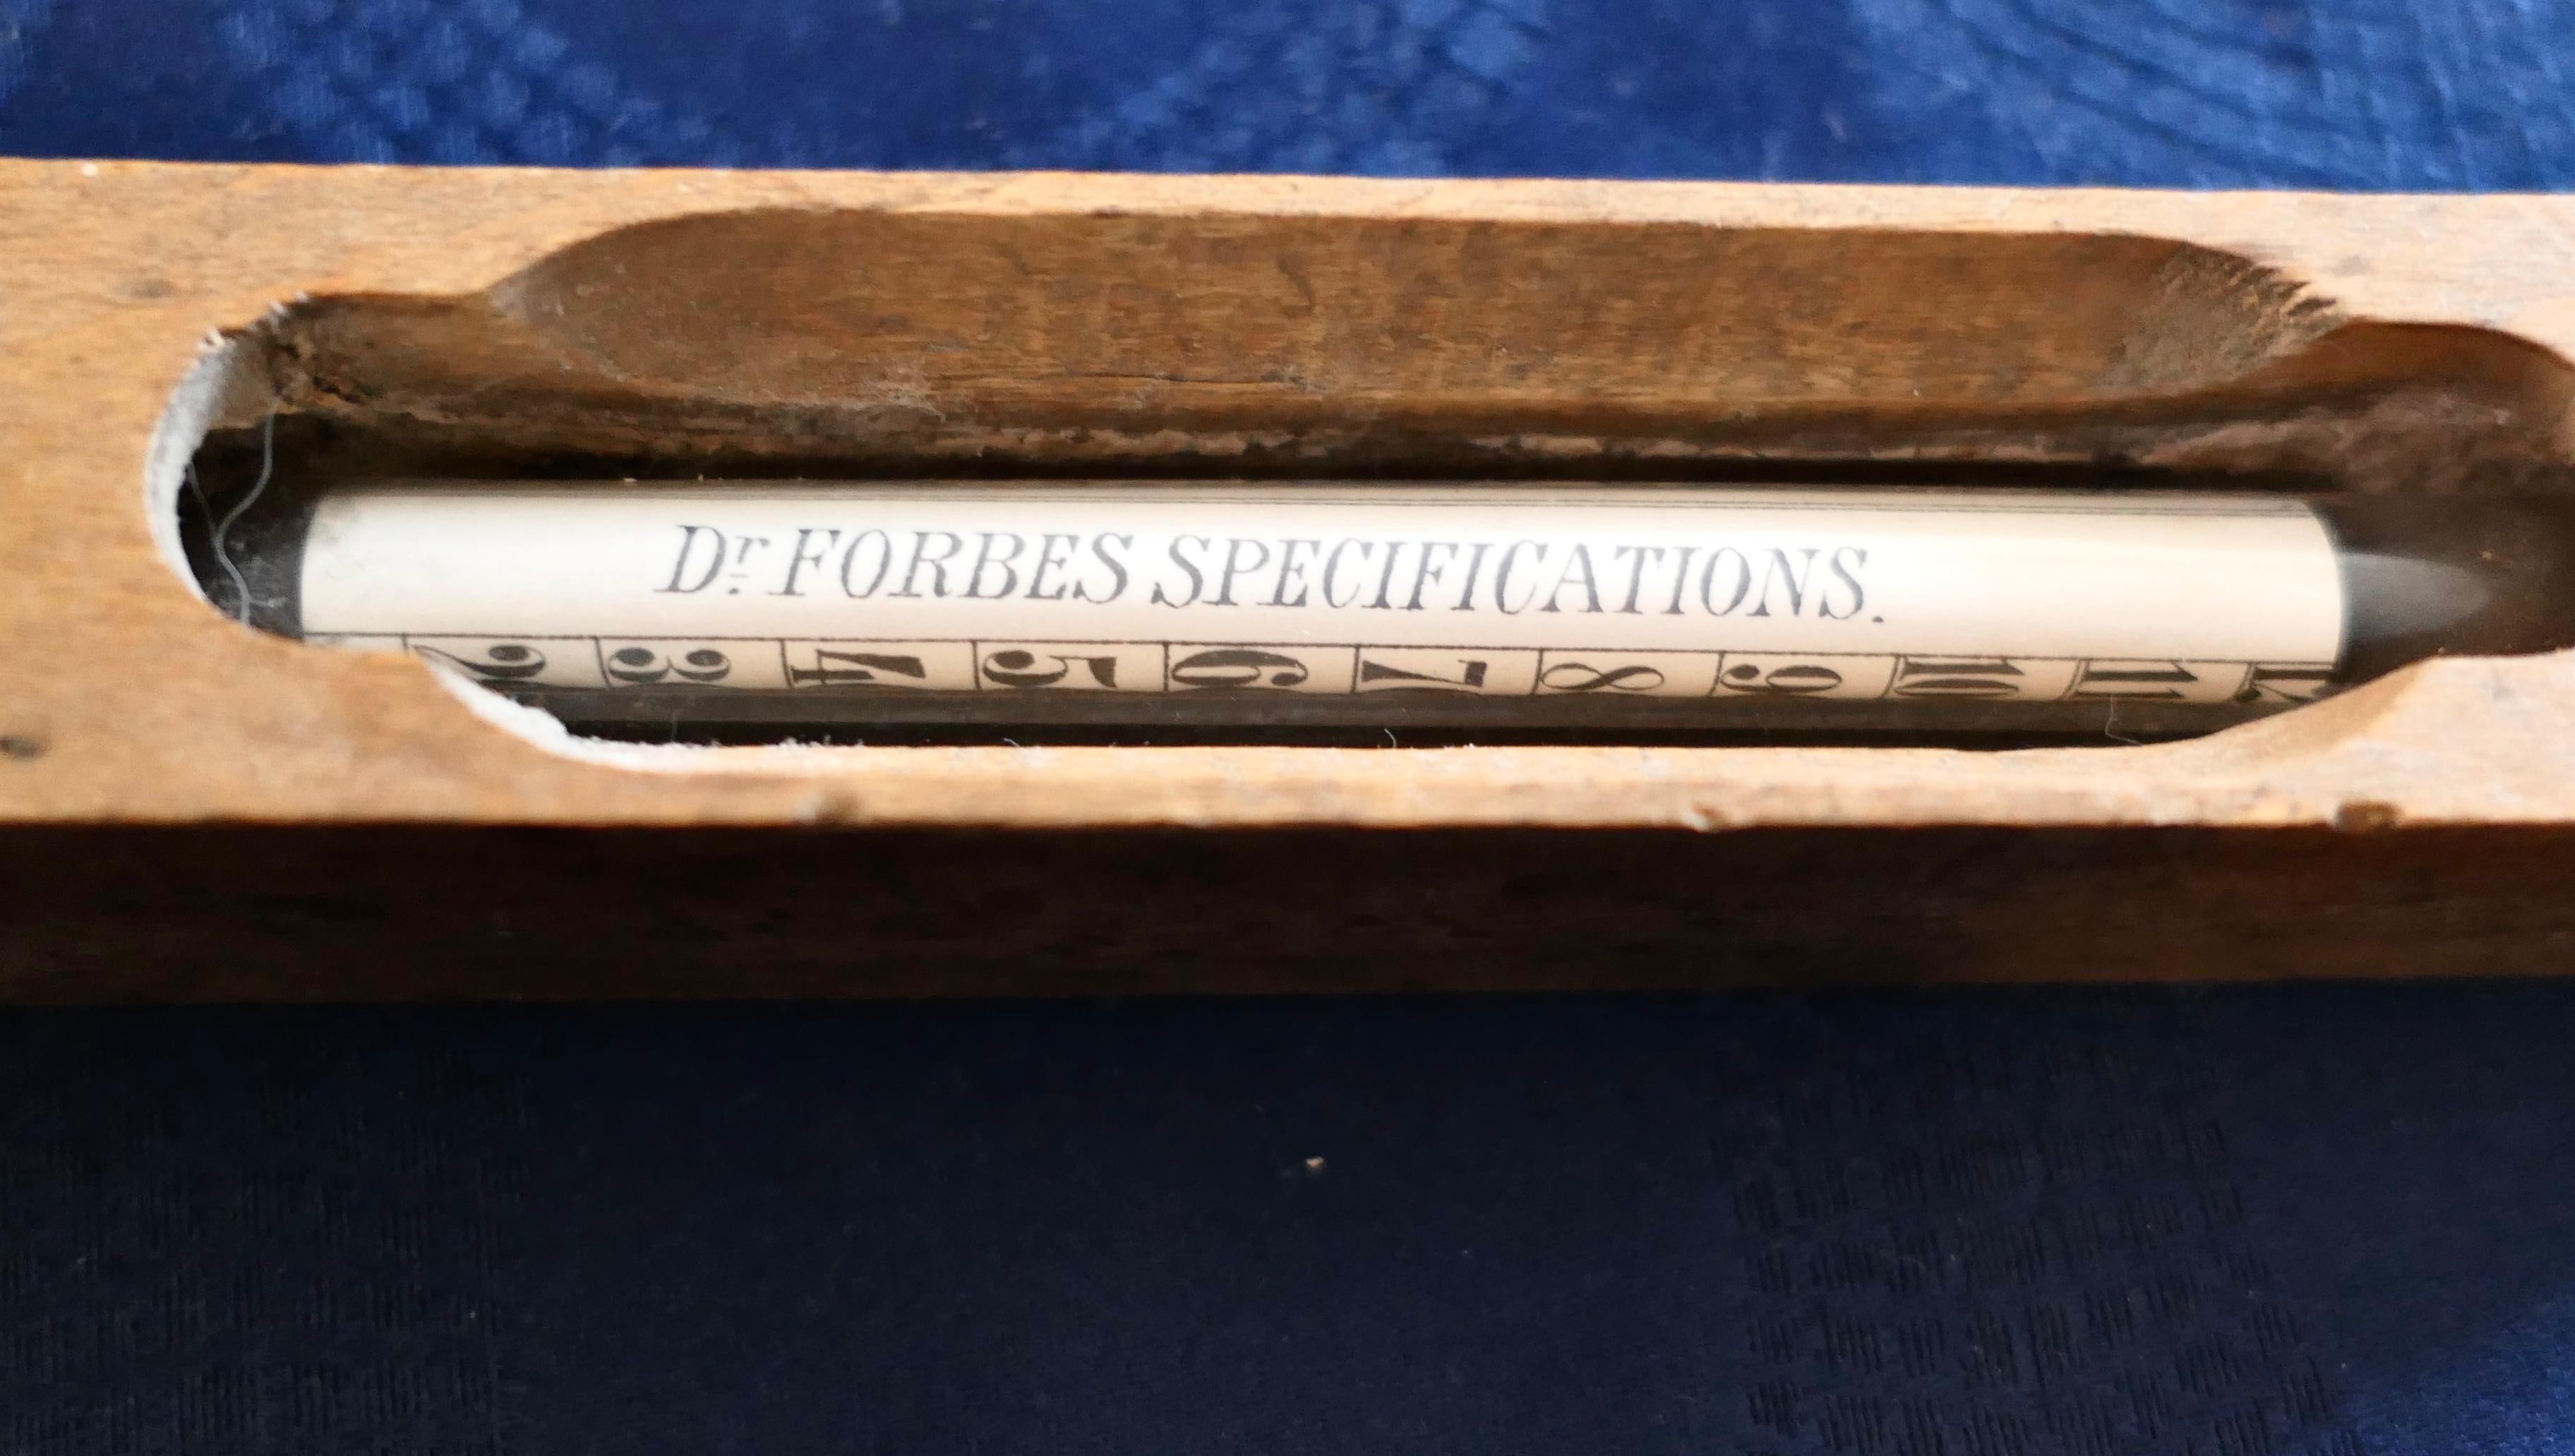 Edwardian Dr Forbes Specifications Bath Thermometer     For Sale